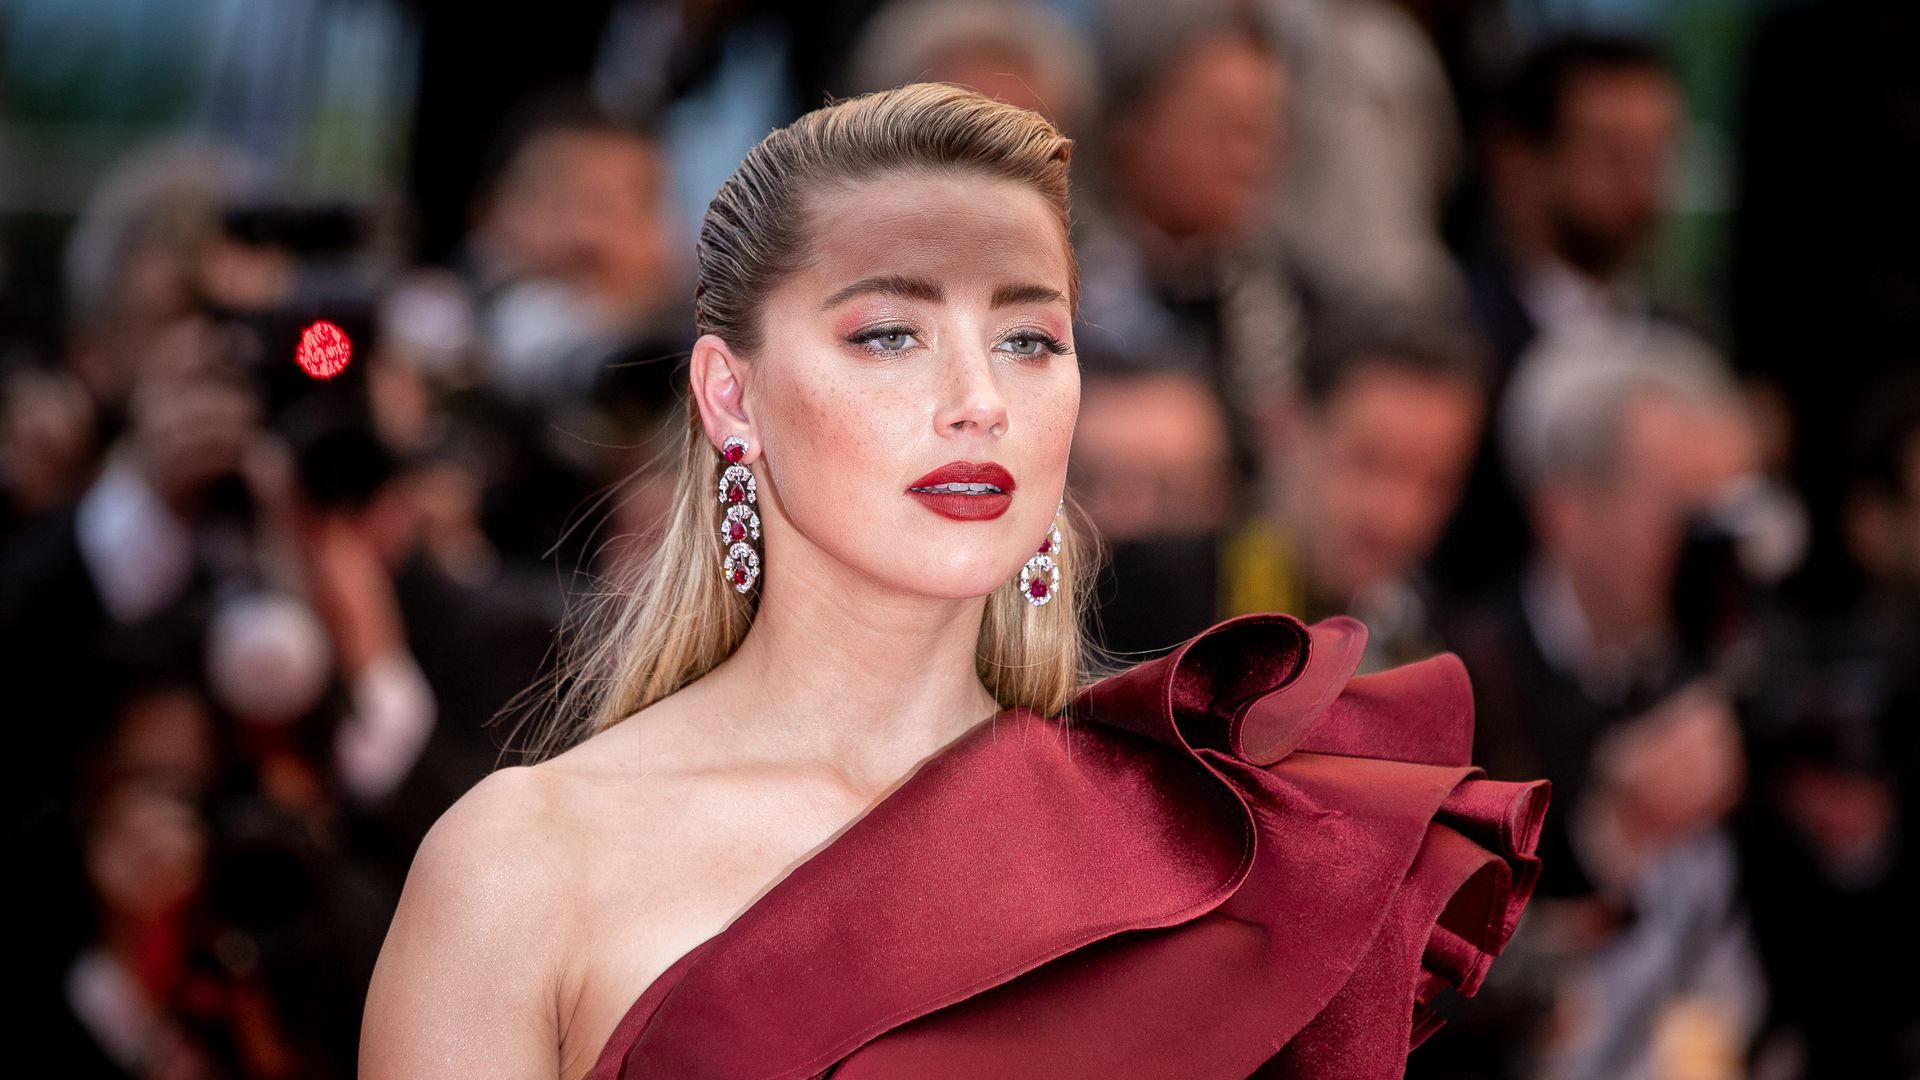 Is Amber Heard living in Spain with daughter Oonagh? All we know of her